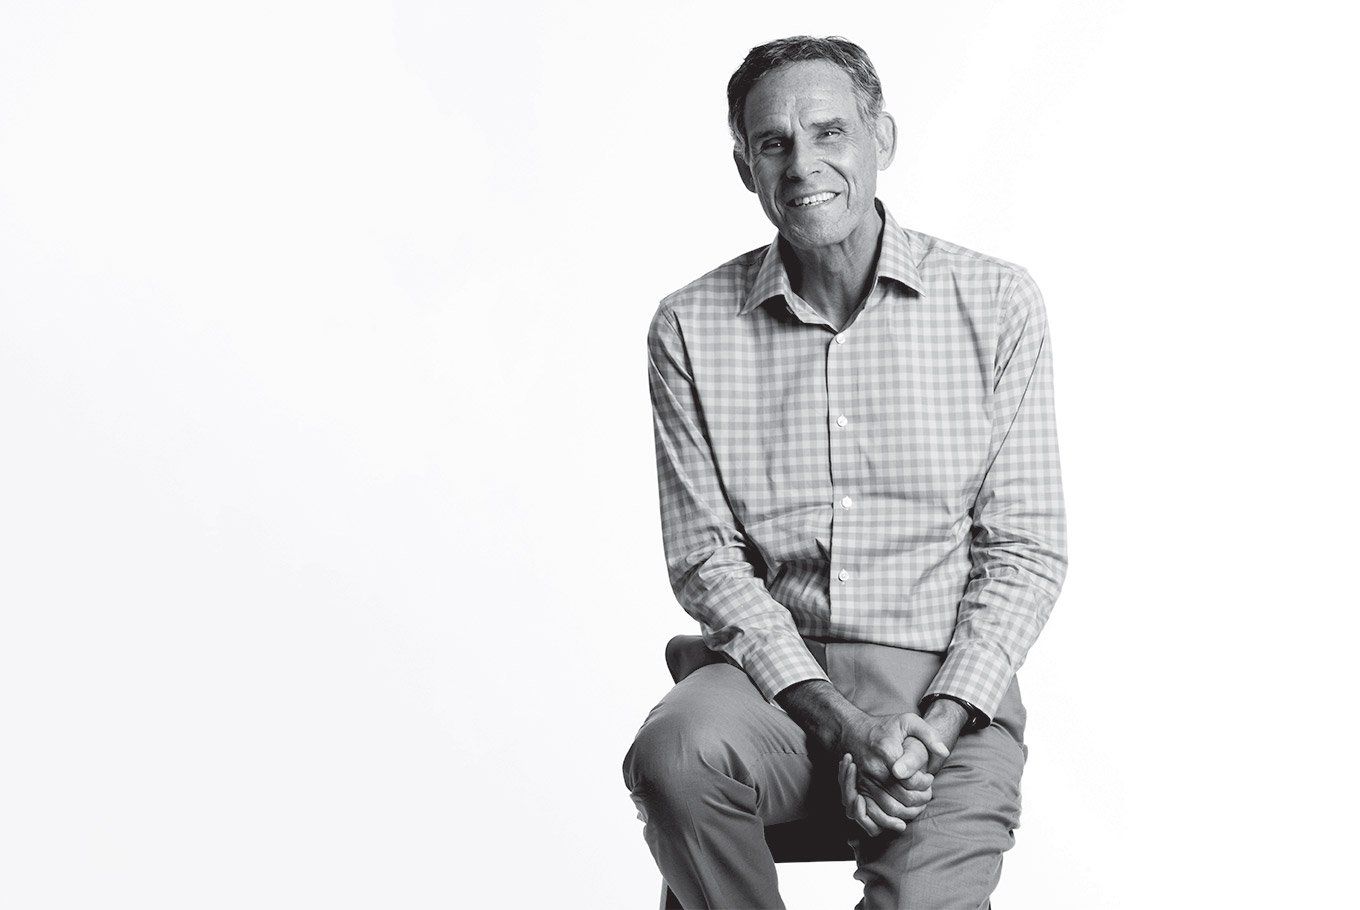 Portrait of Eric Topol, MD, in front of a white background.